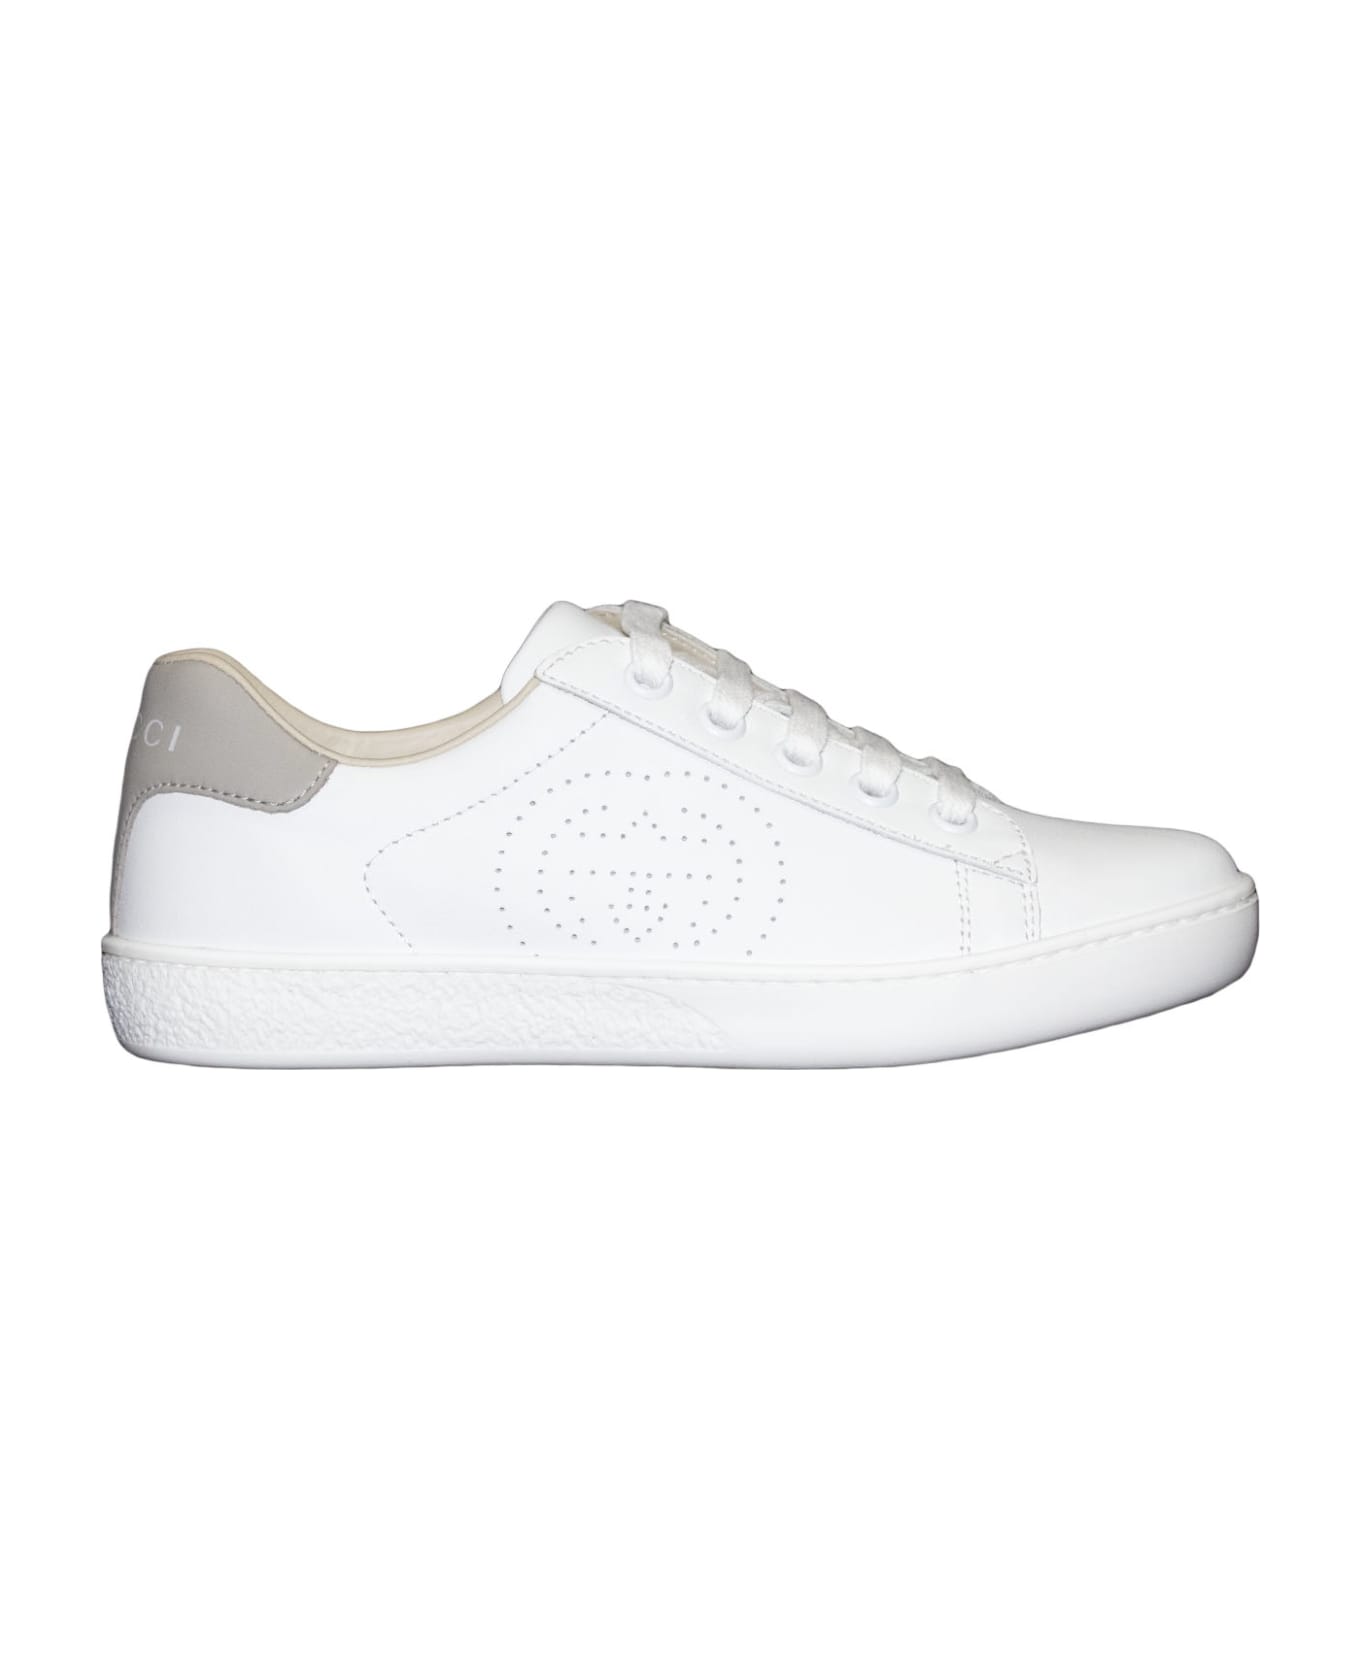 Gucci Leather Sneakers - White シューズ